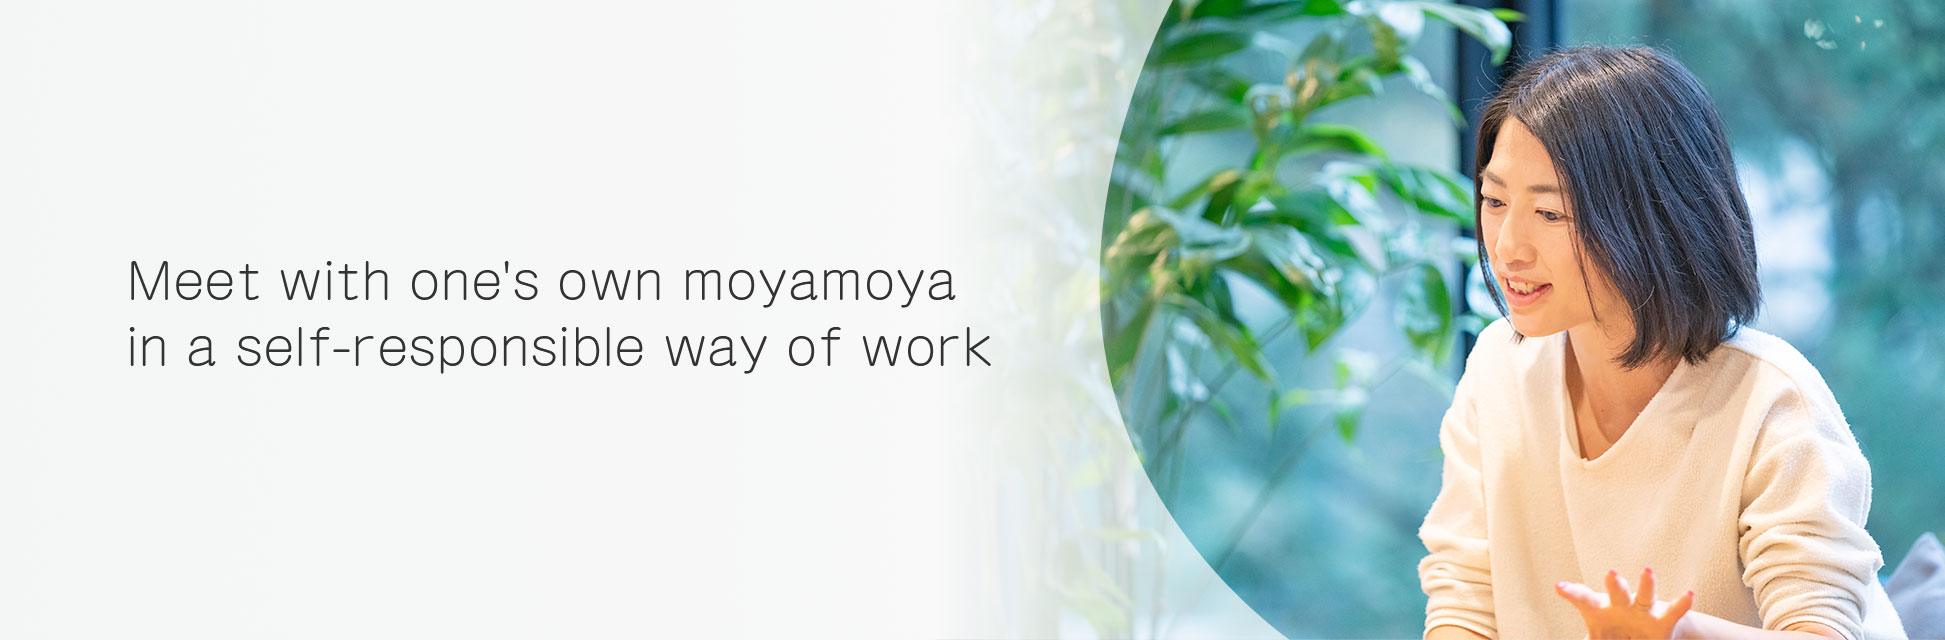 Meet with one's own moyamoya in a self-responsible way of work